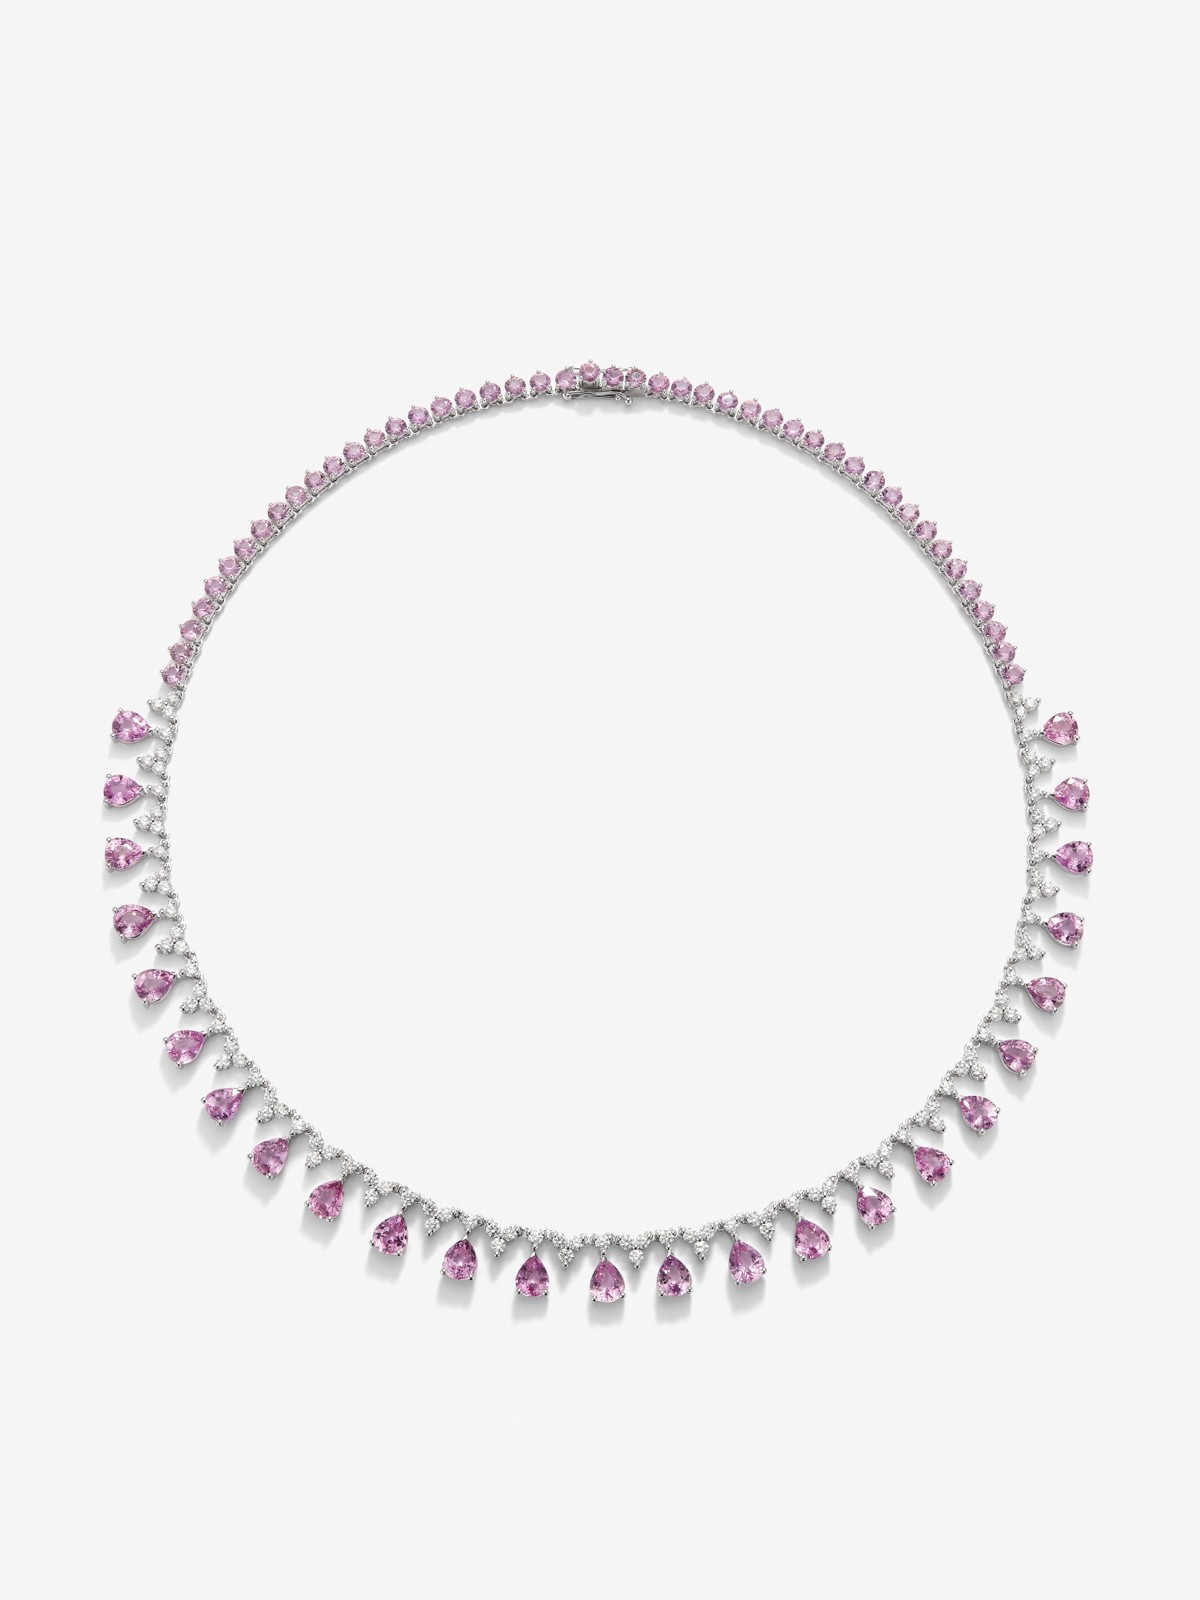 18K White Gold Rivière Collar with pink sapps in pear size and bright 26.89 cts and white diamonds in bright size of 3.85 cts